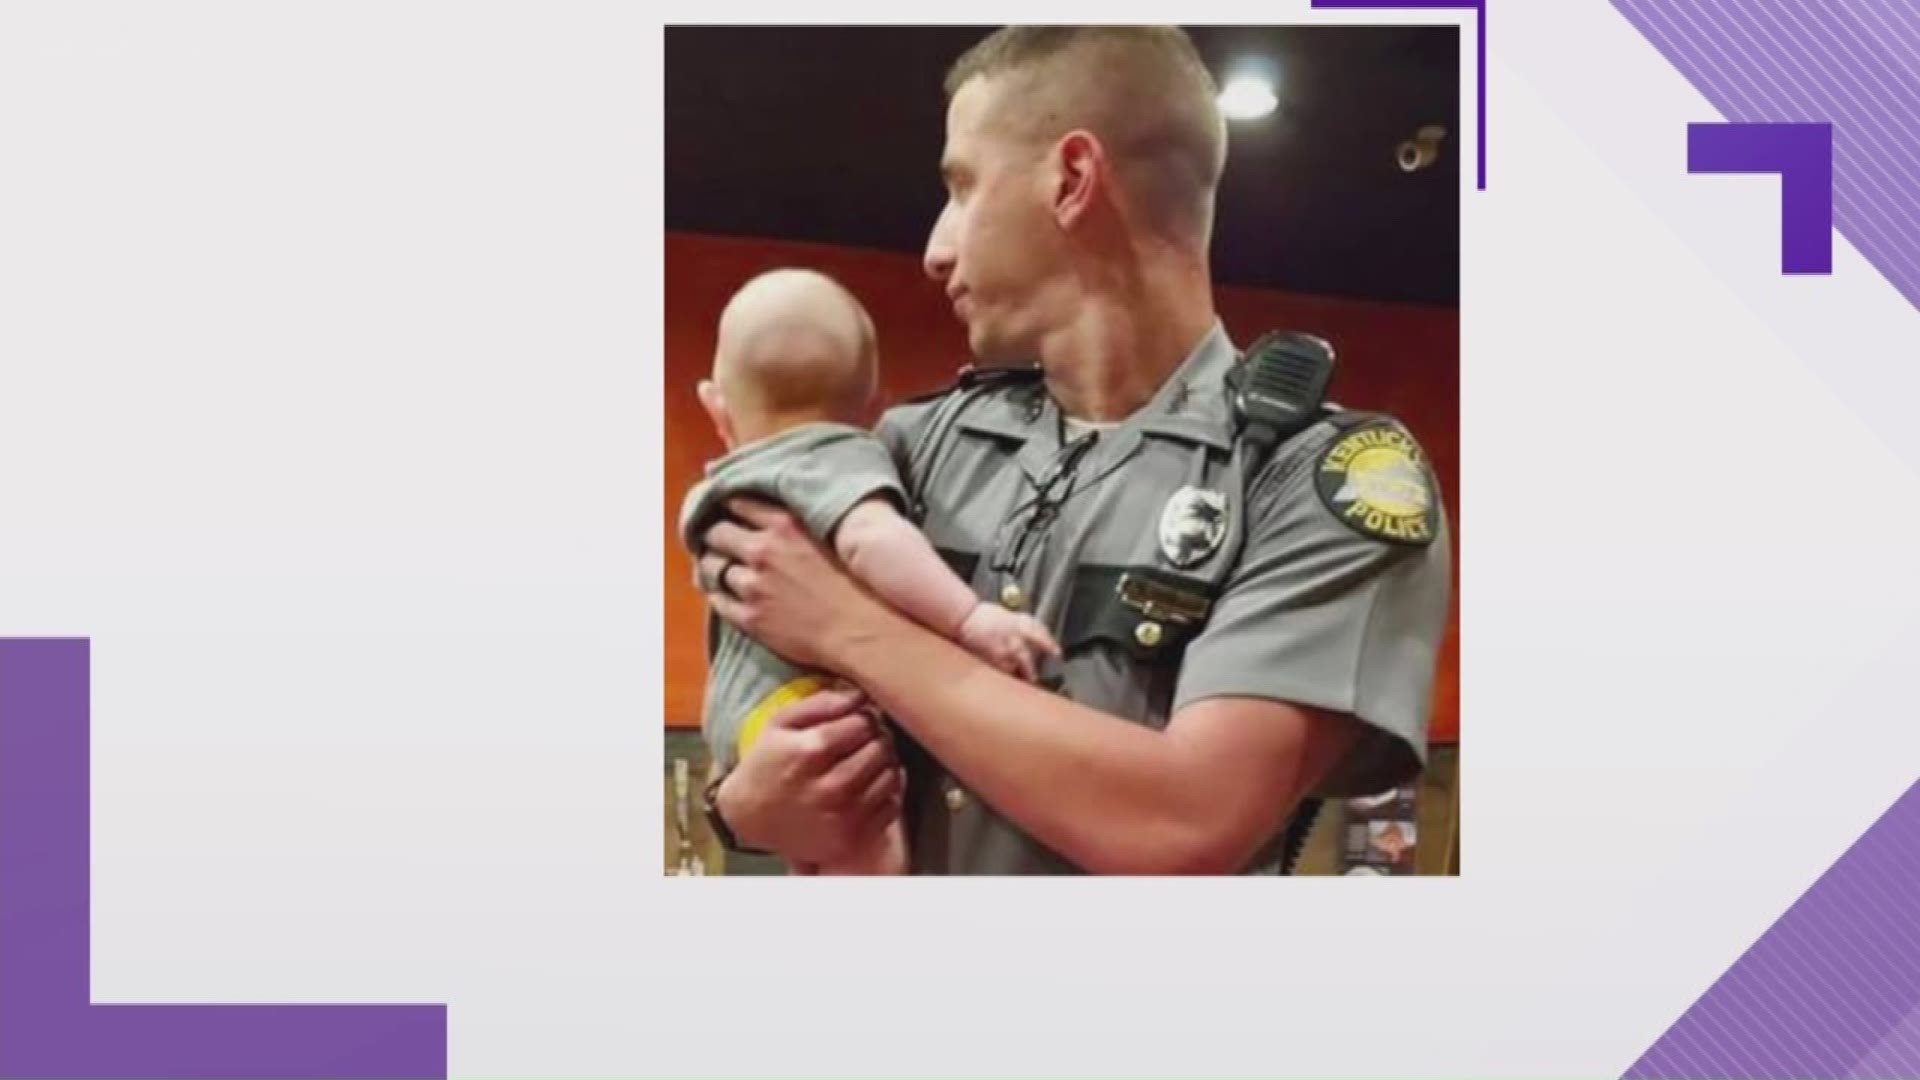 Kentucky state trooper, Aaron Hampton, is all over the web after calming 3-month-old in Mumfordville restaurant.